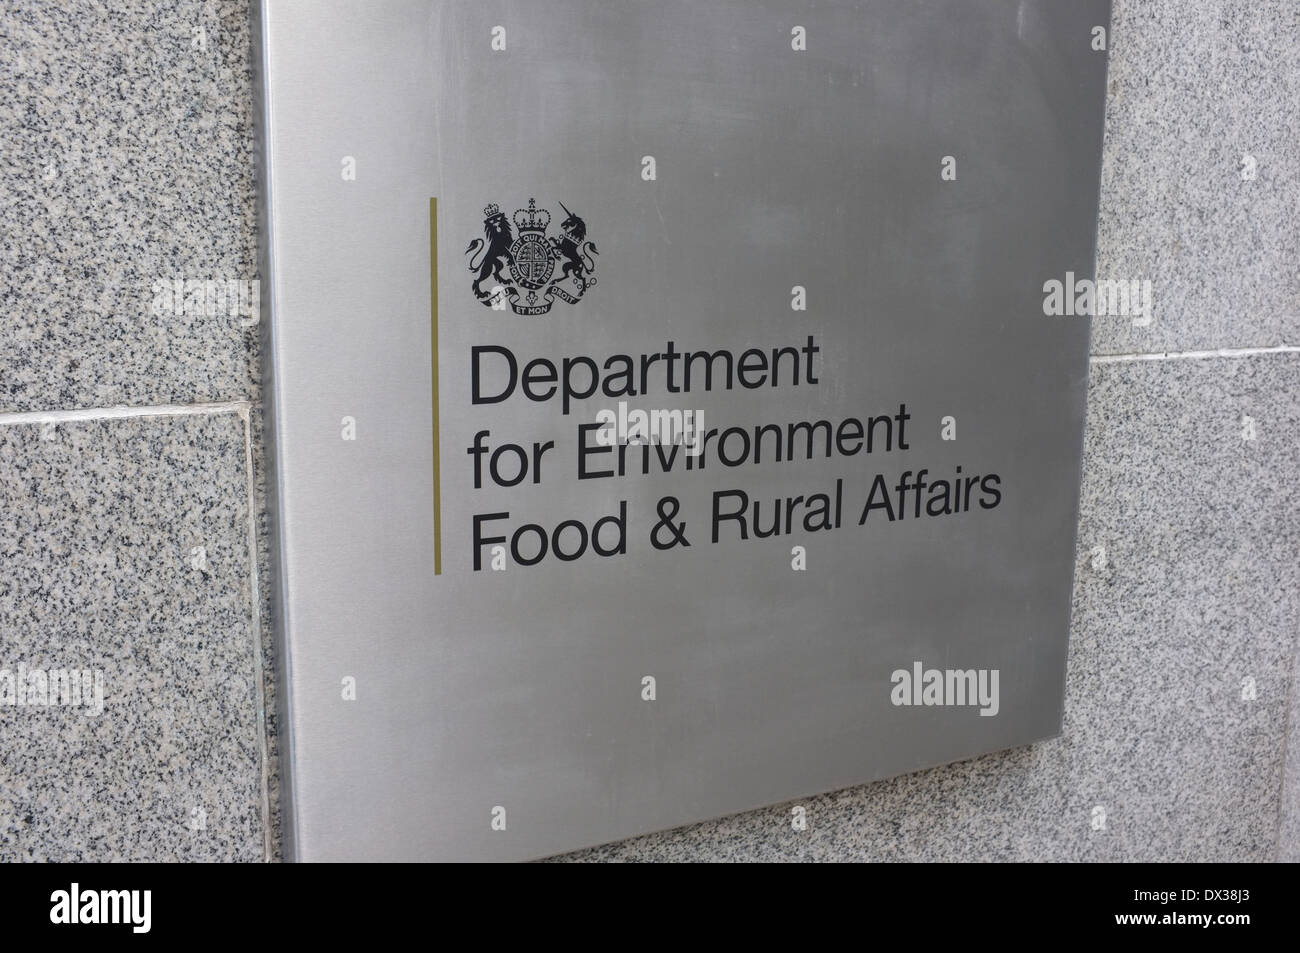 department for environment food and rural affairs smith square westminster london sw1 london uk 2014 Stock Photo